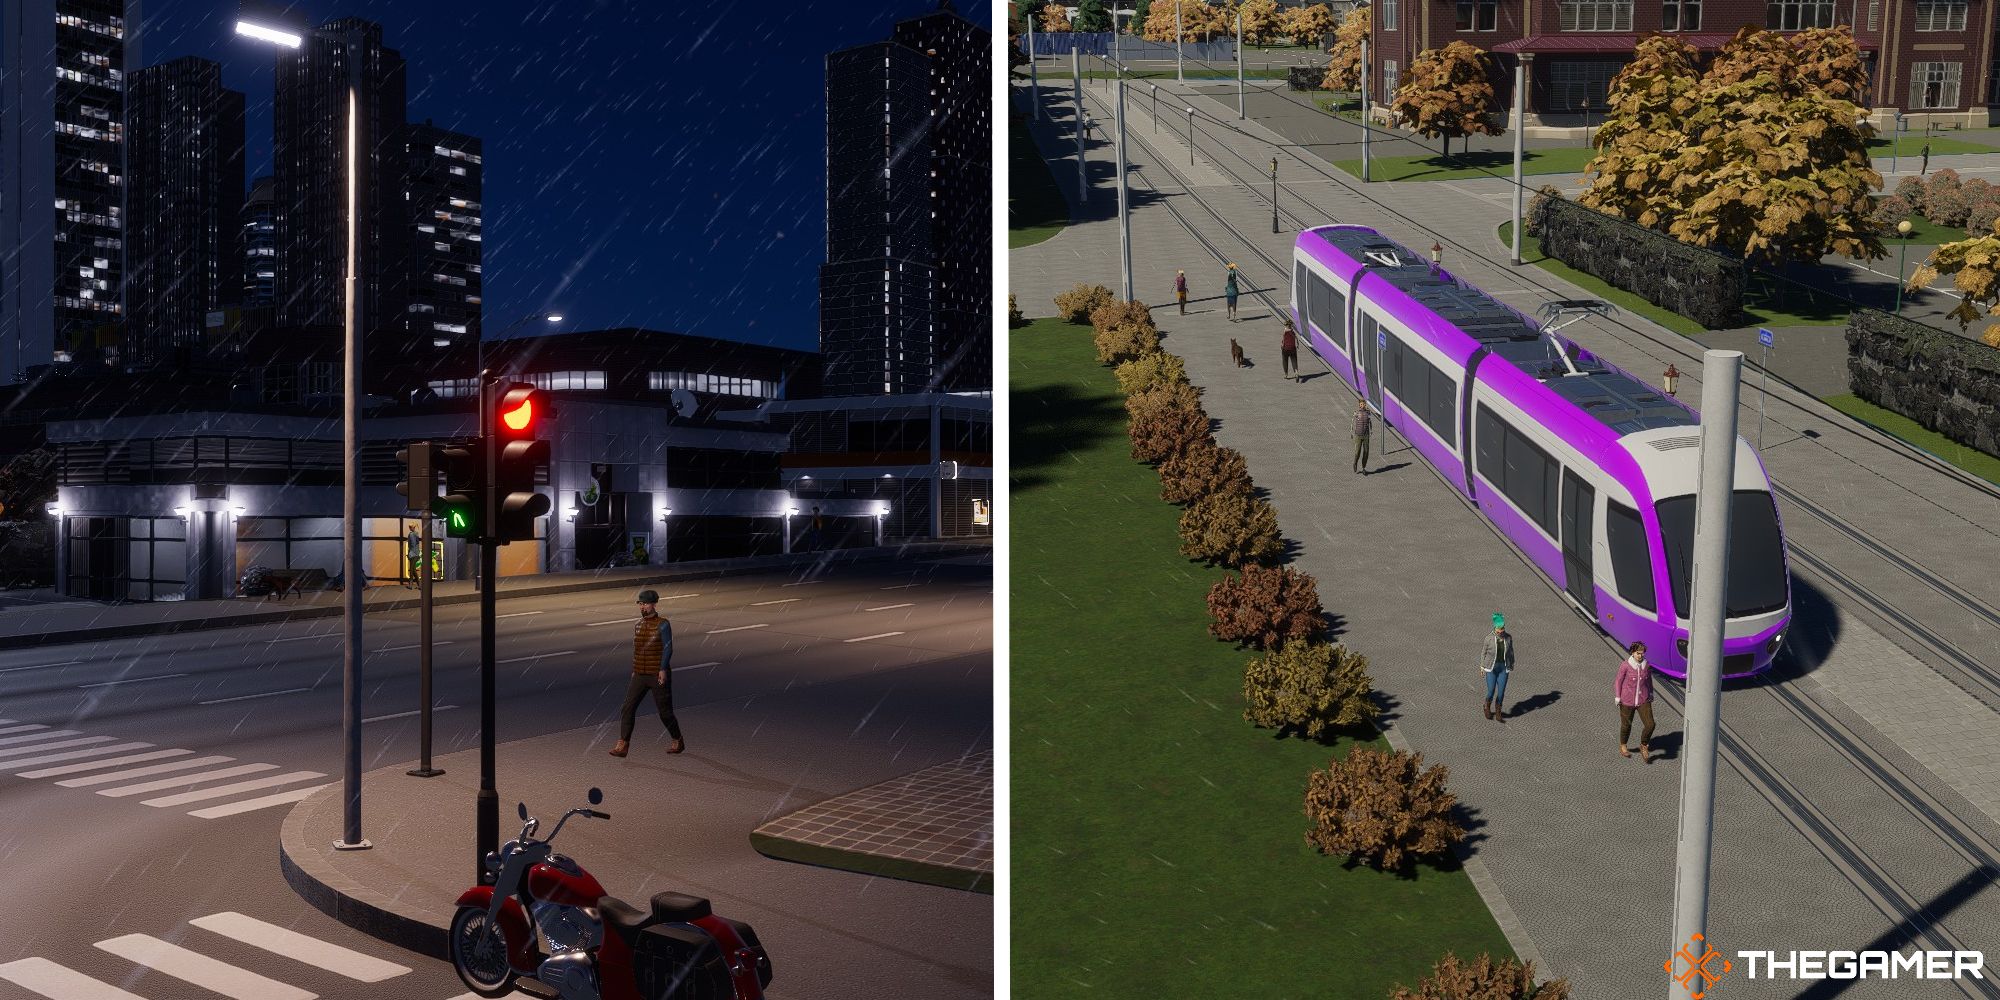 cities skylines 2 split image showing downtown corner at night next to image of tram on pedestrian street